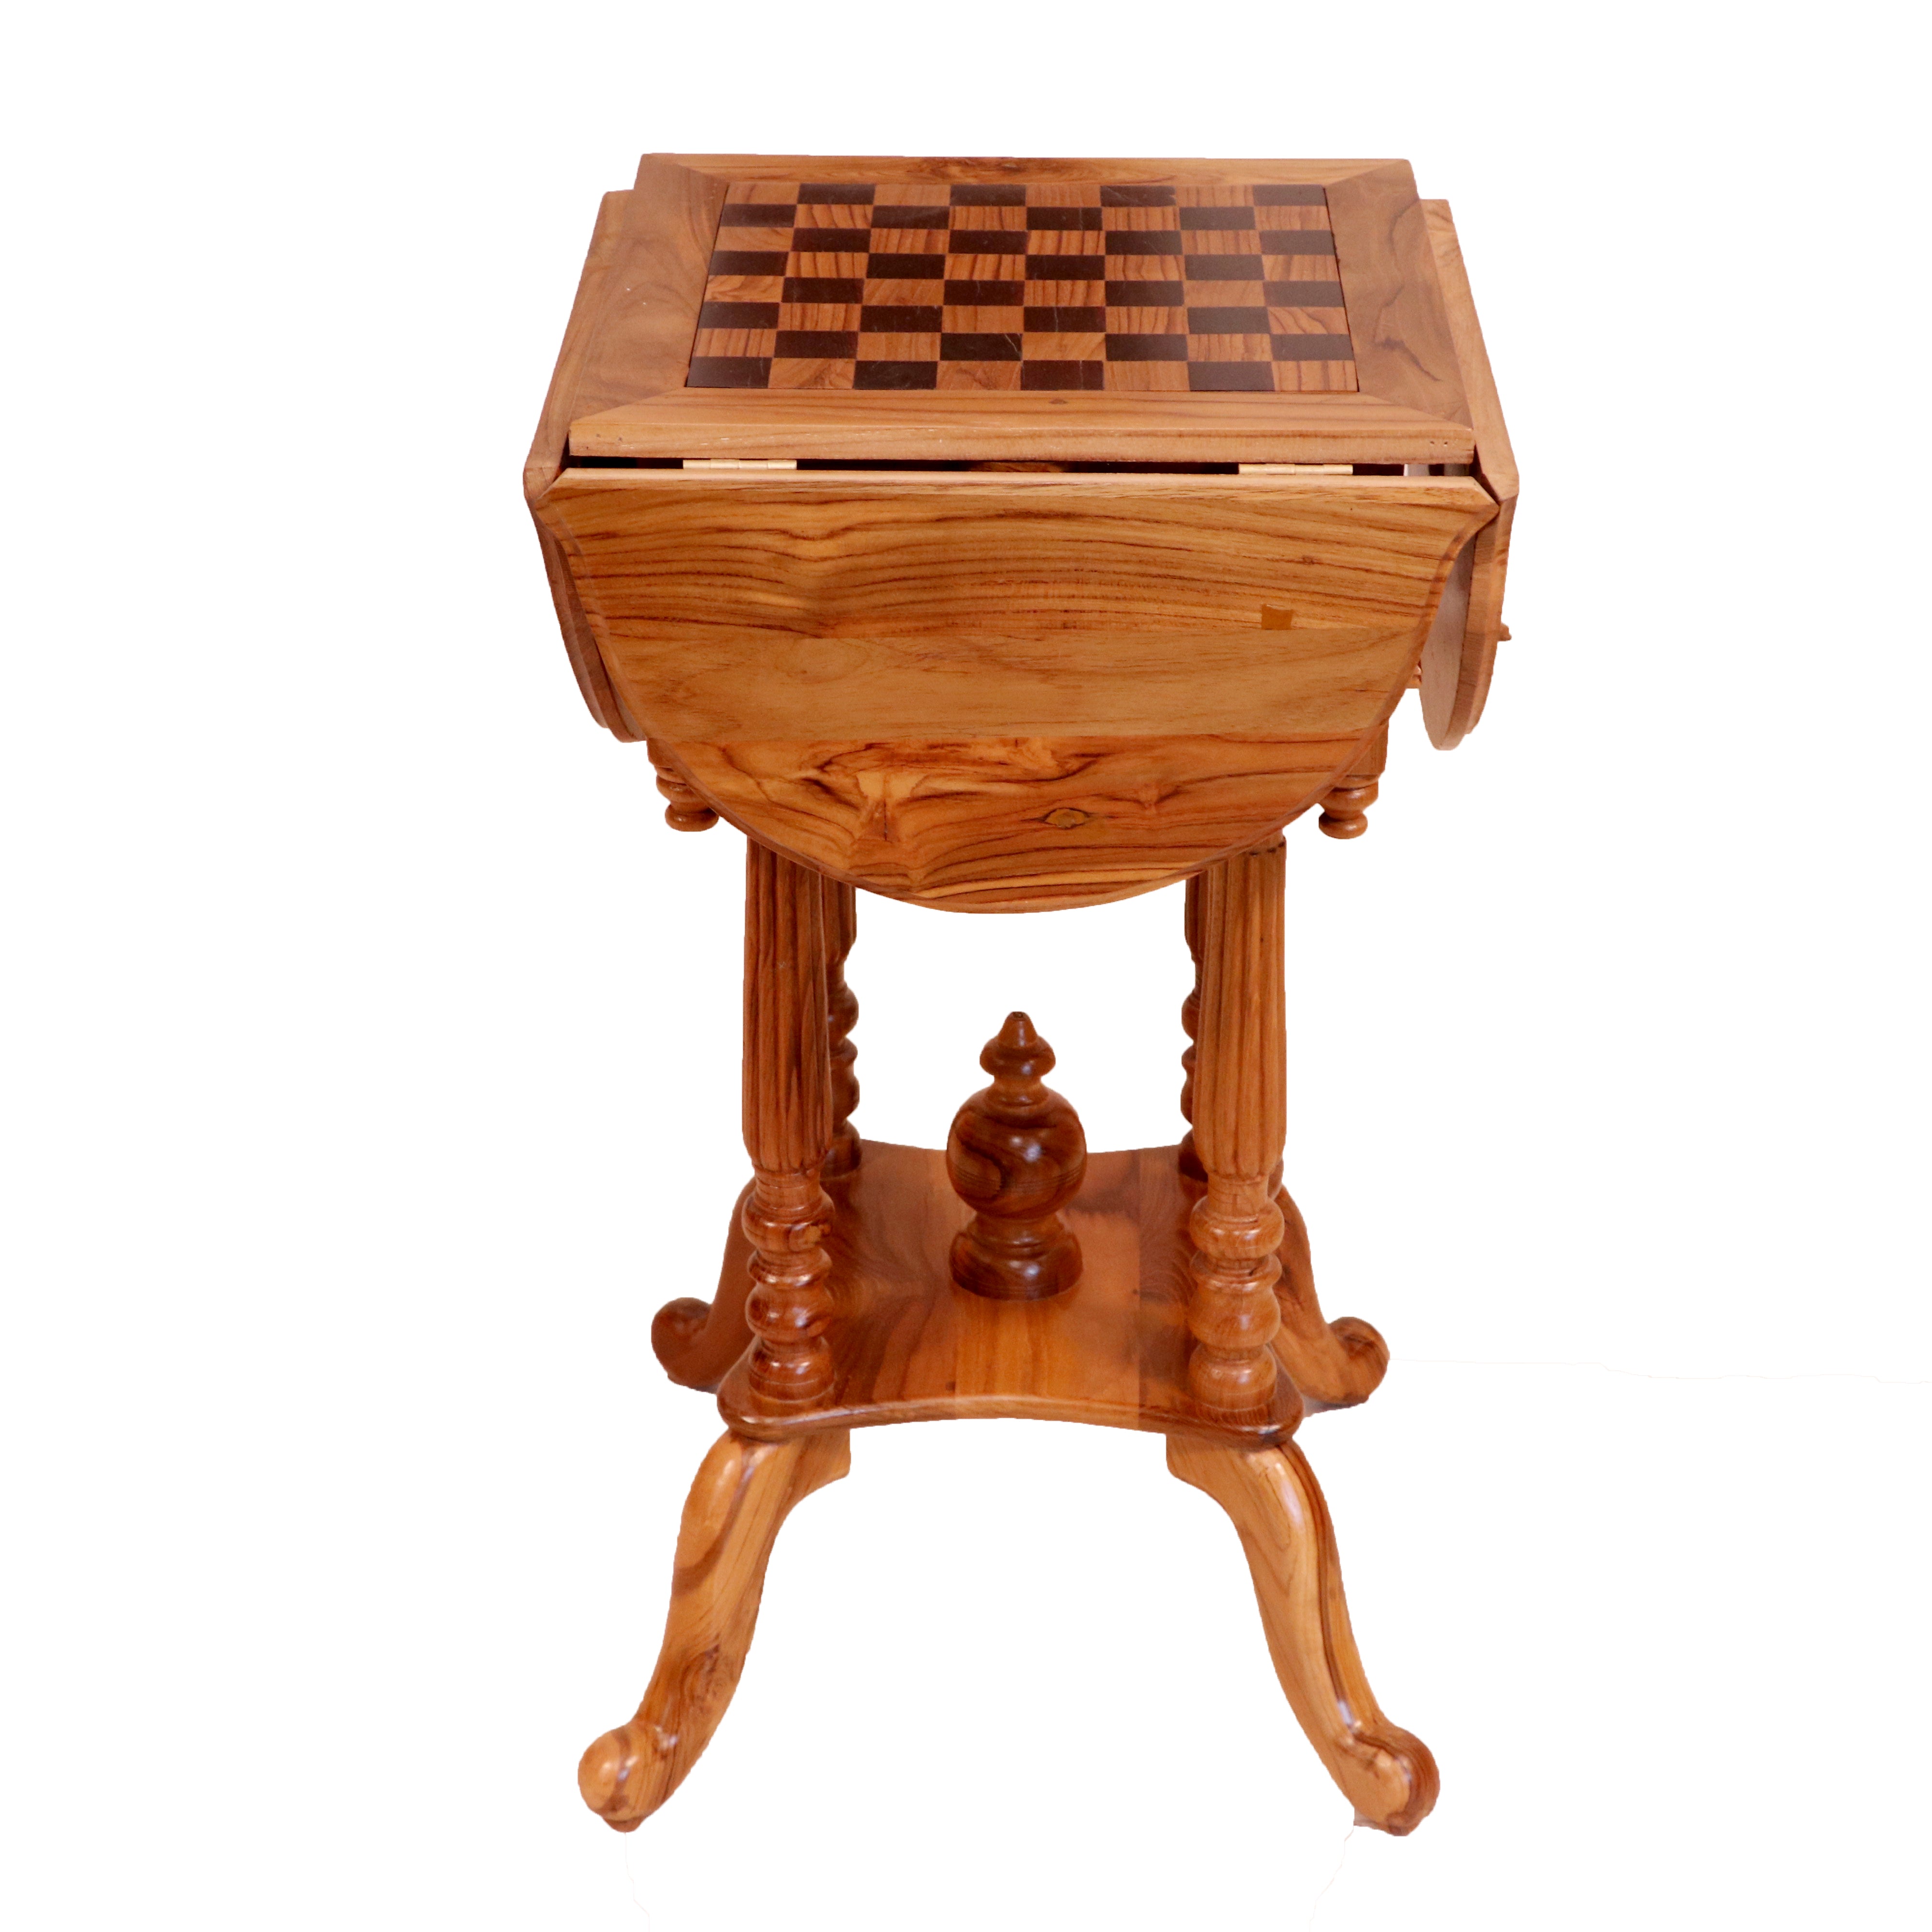 Charming Chess Style Handmade Wooden End Table for Home End Table